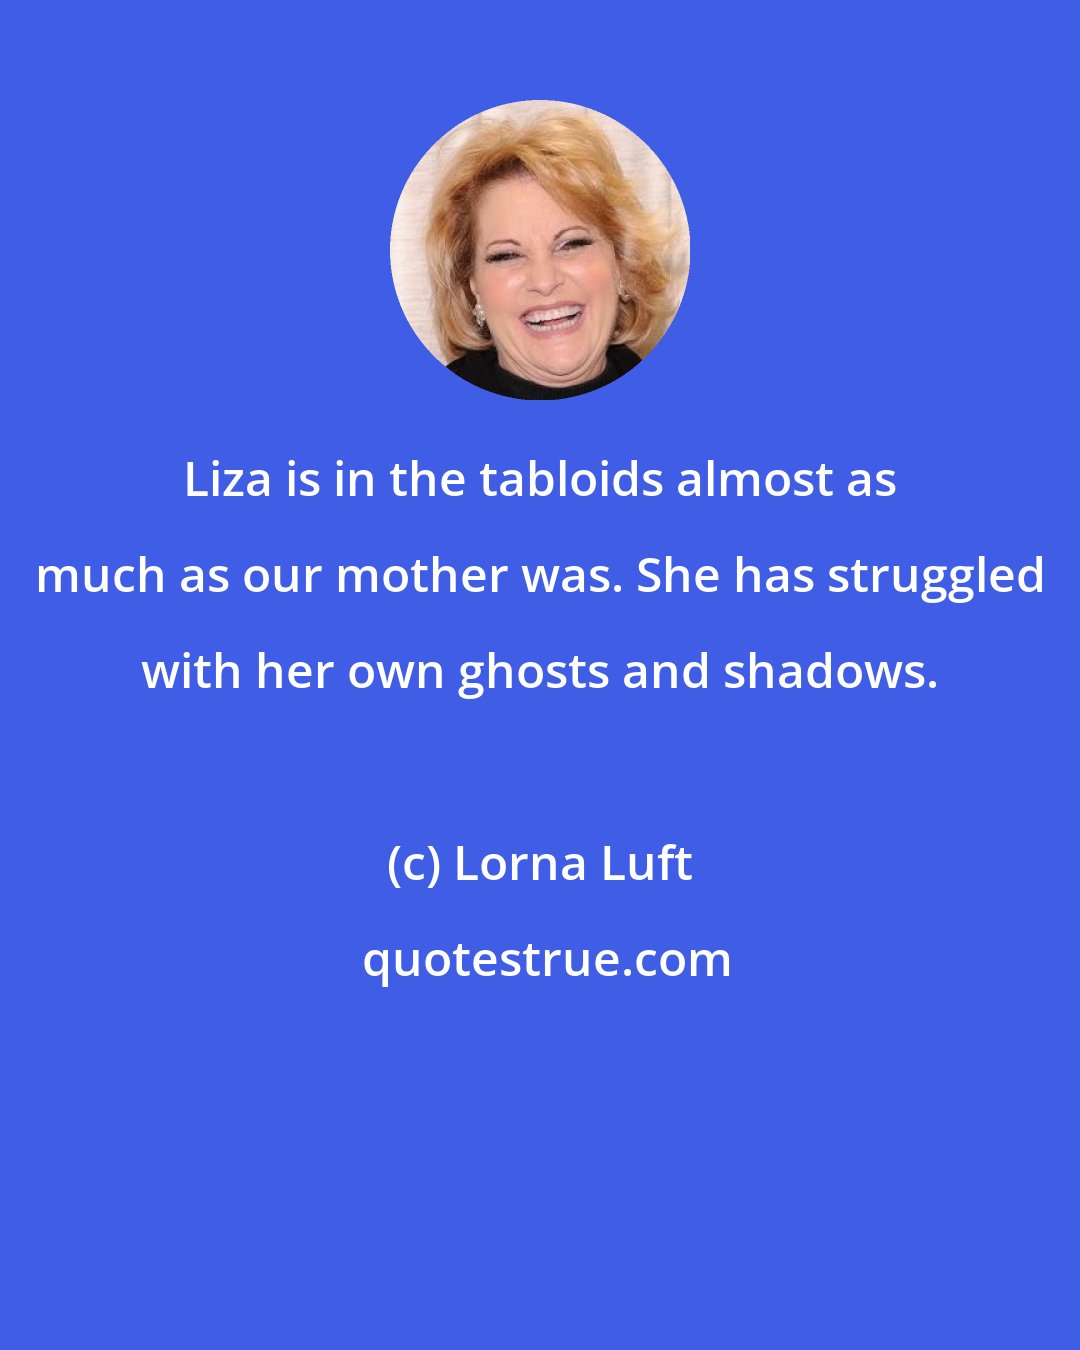 Lorna Luft: Liza is in the tabloids almost as much as our mother was. She has struggled with her own ghosts and shadows.